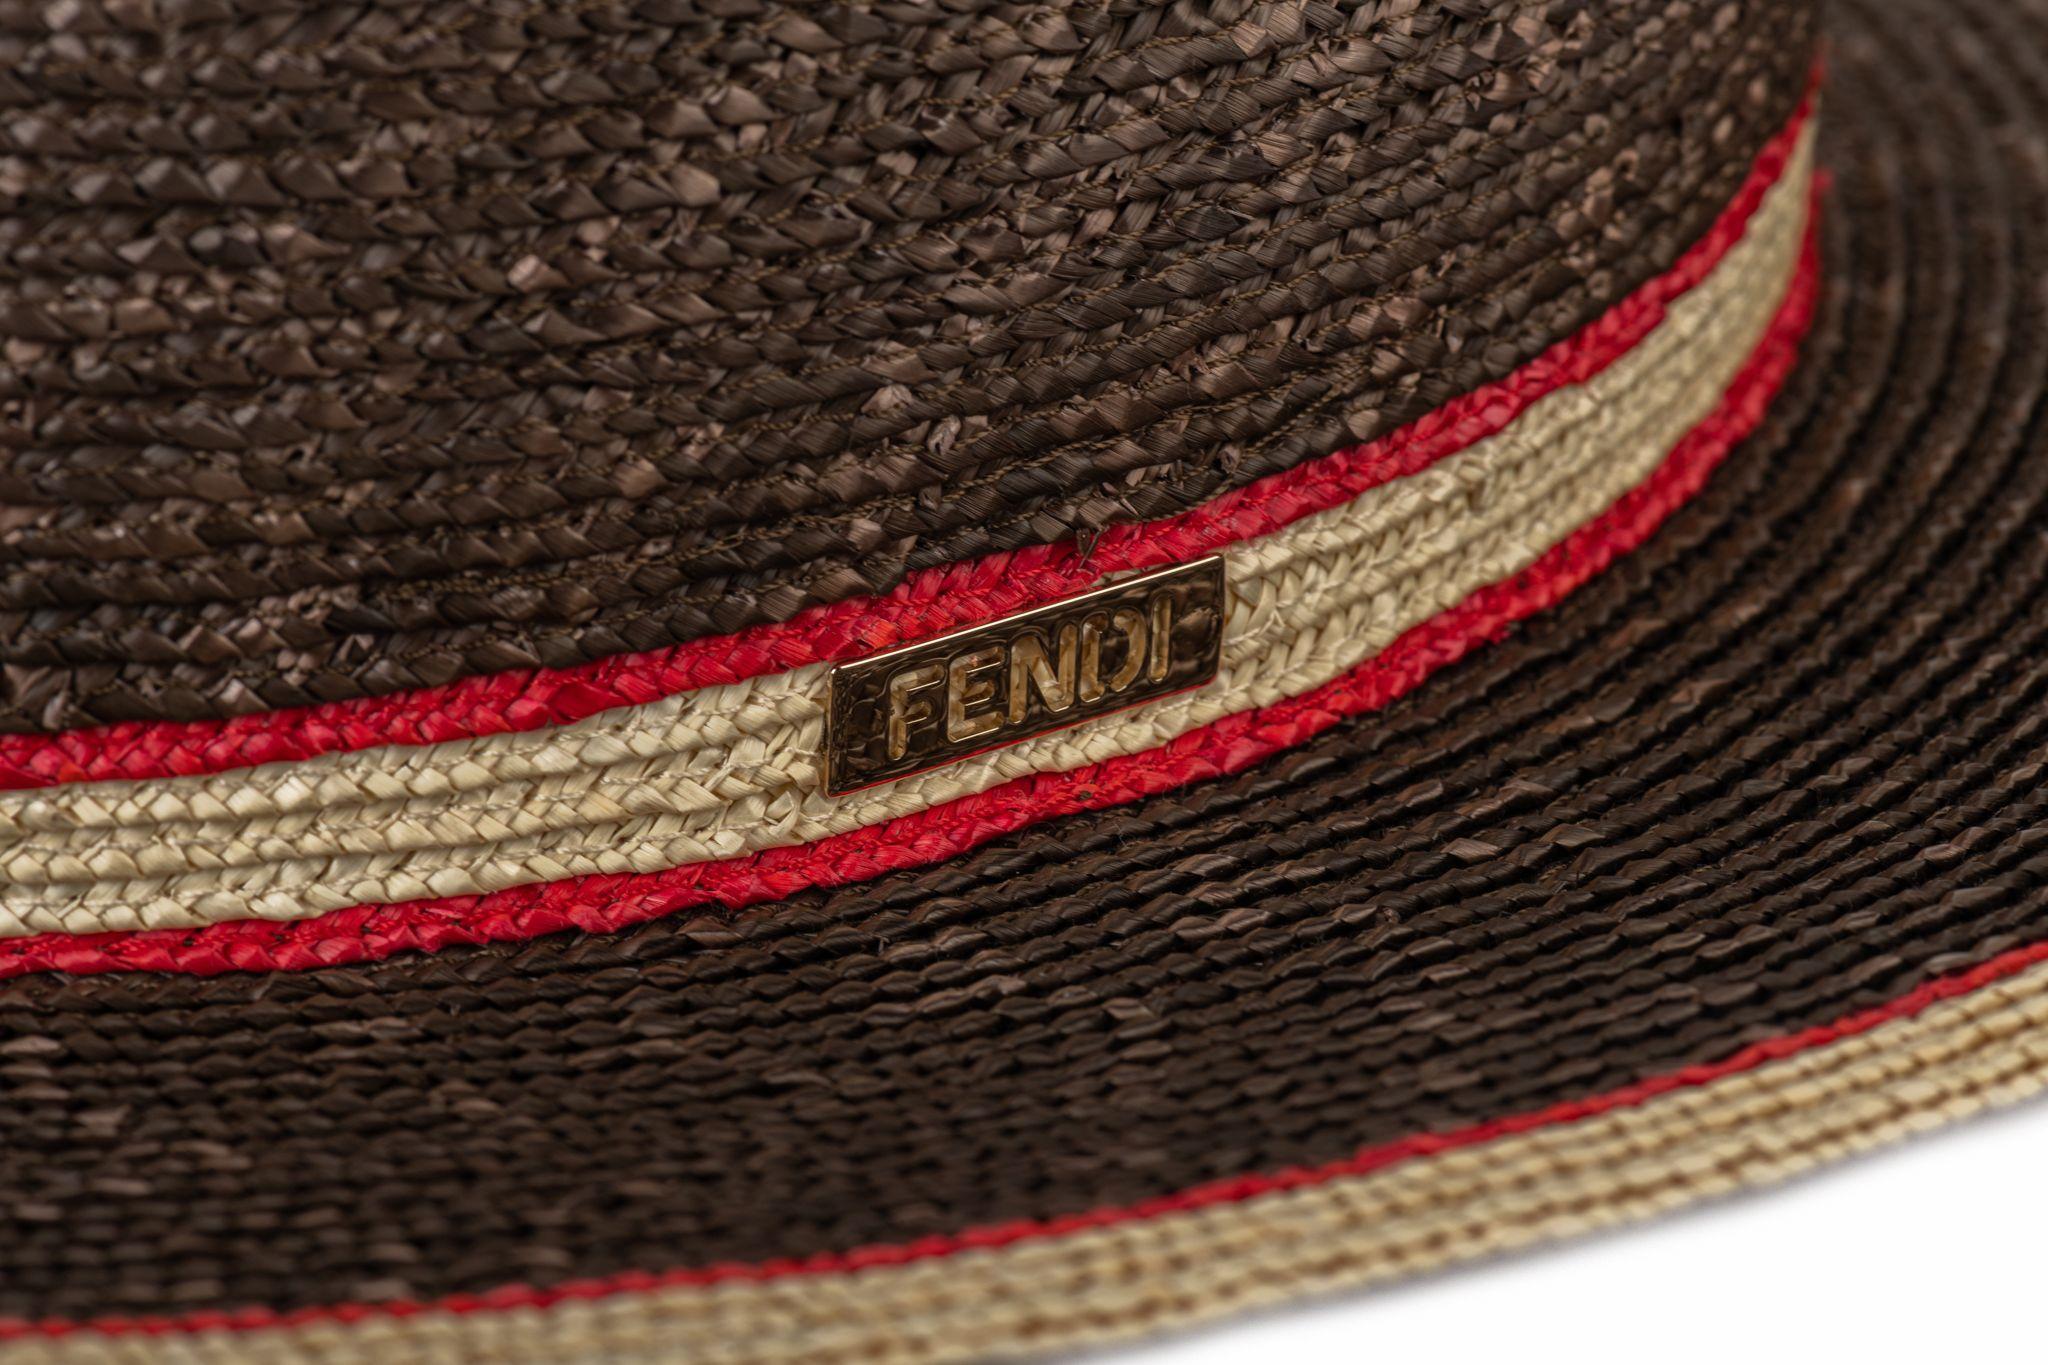 Fendi new with tag brown straw hat with red and beige stripe. Size M, 59 cm. Unworn condition. Comes with original tag cover .